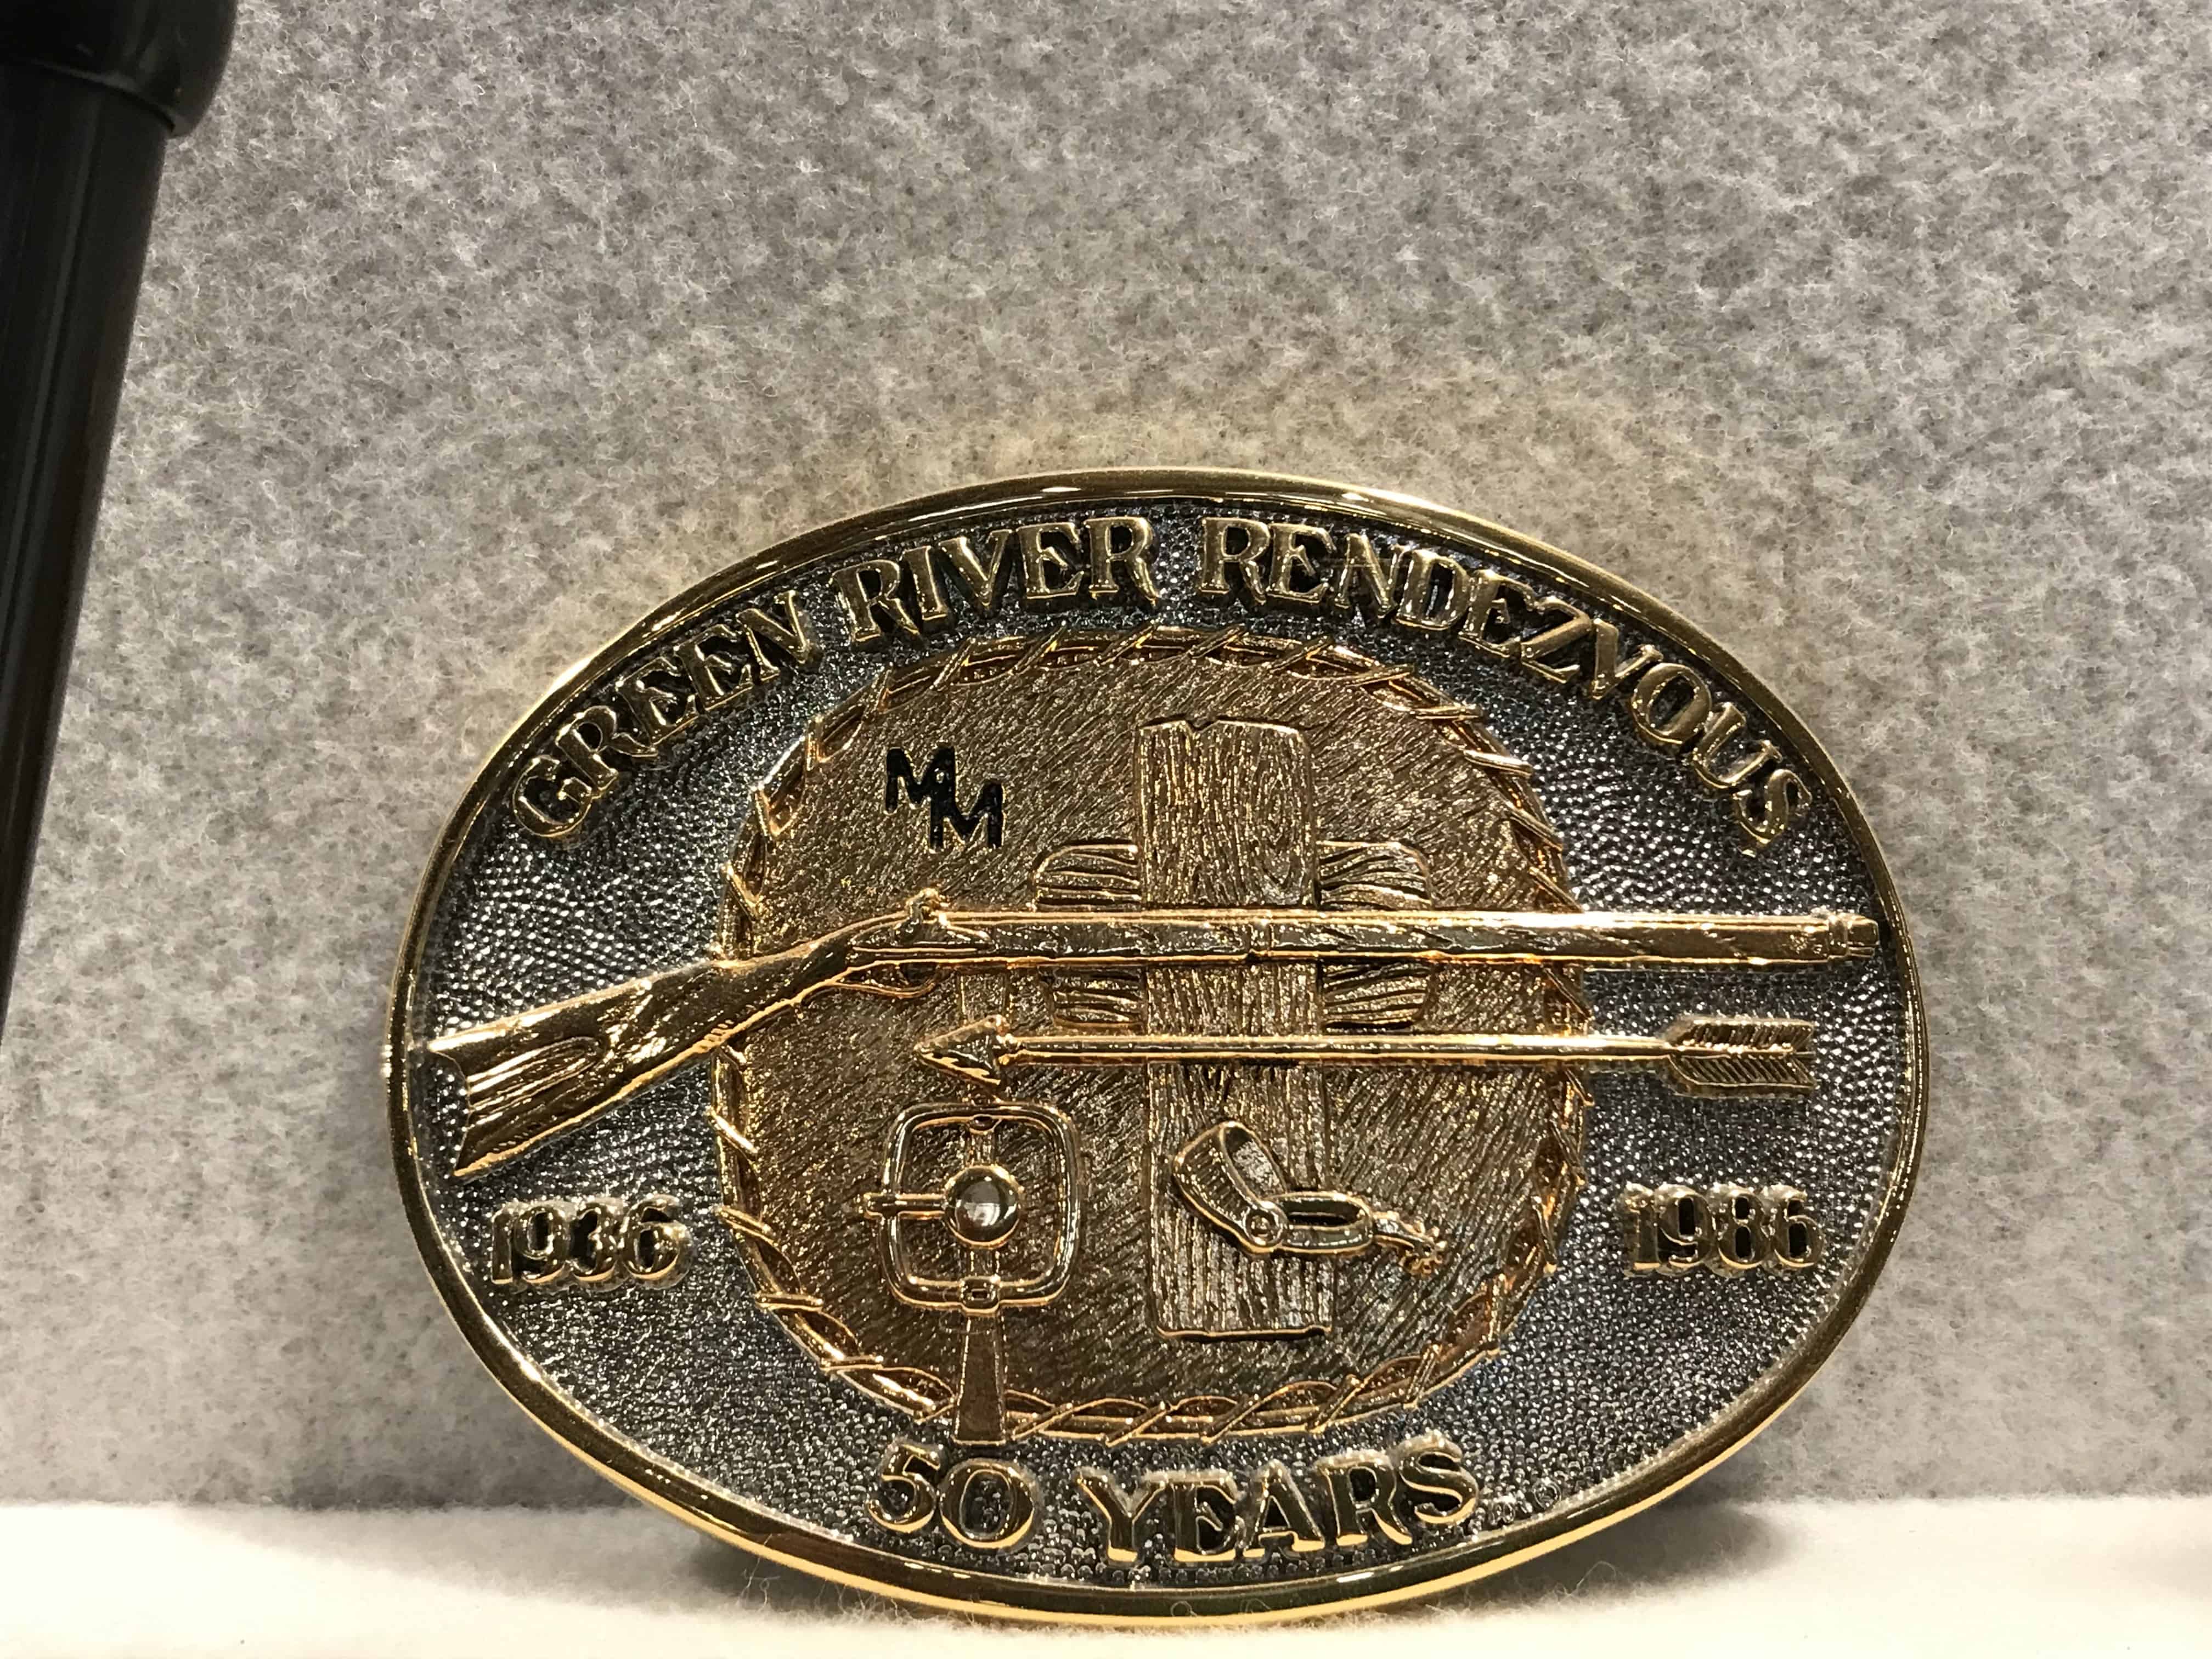 Commemorative belt buckle from the Green River Rendezvous